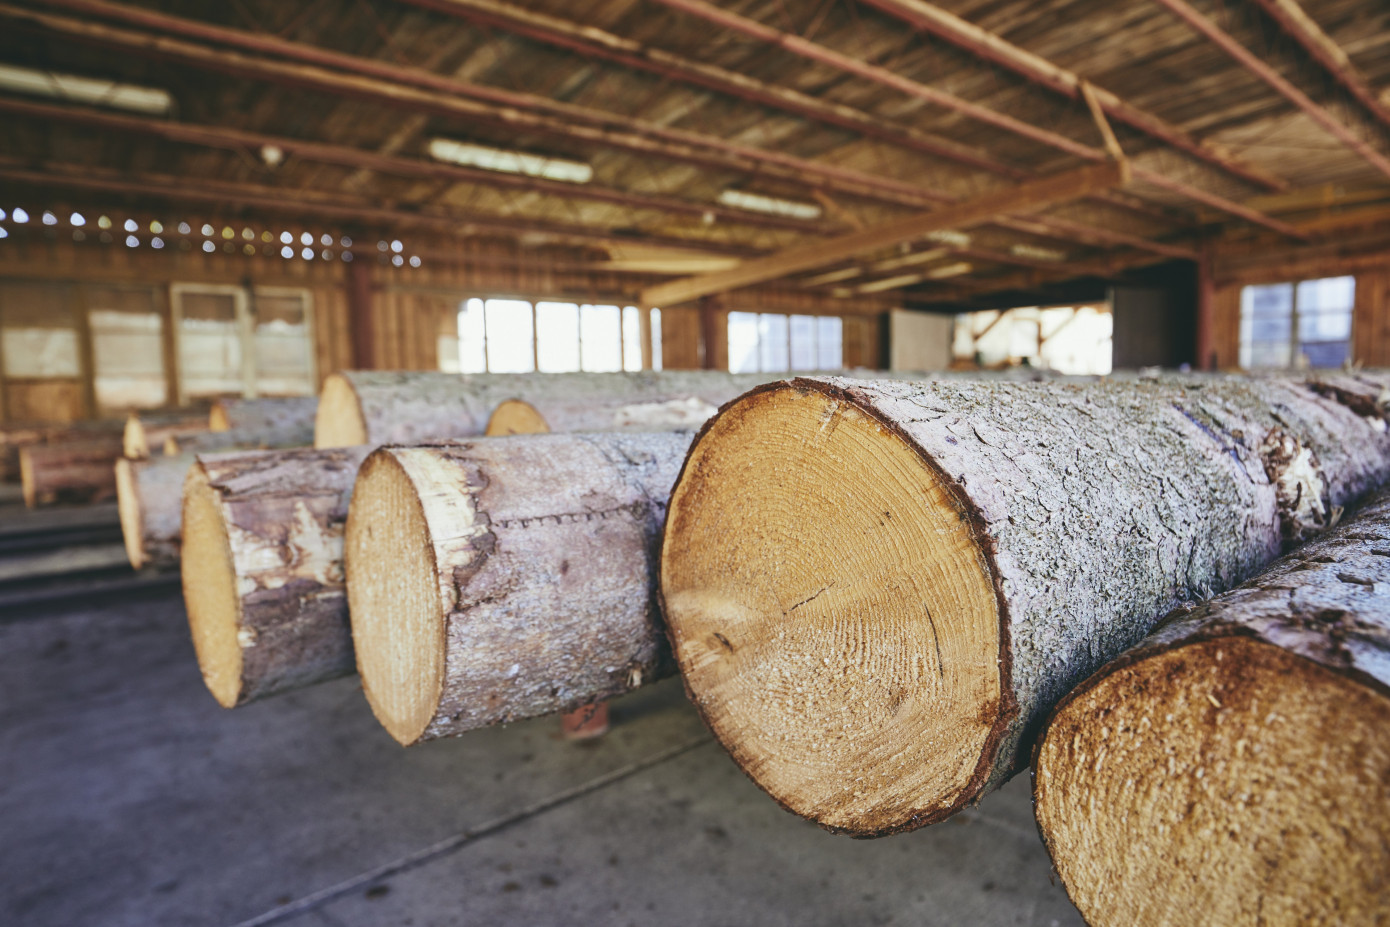 Sawlog prices fell throughout the world in 2019 with most decline in Europe